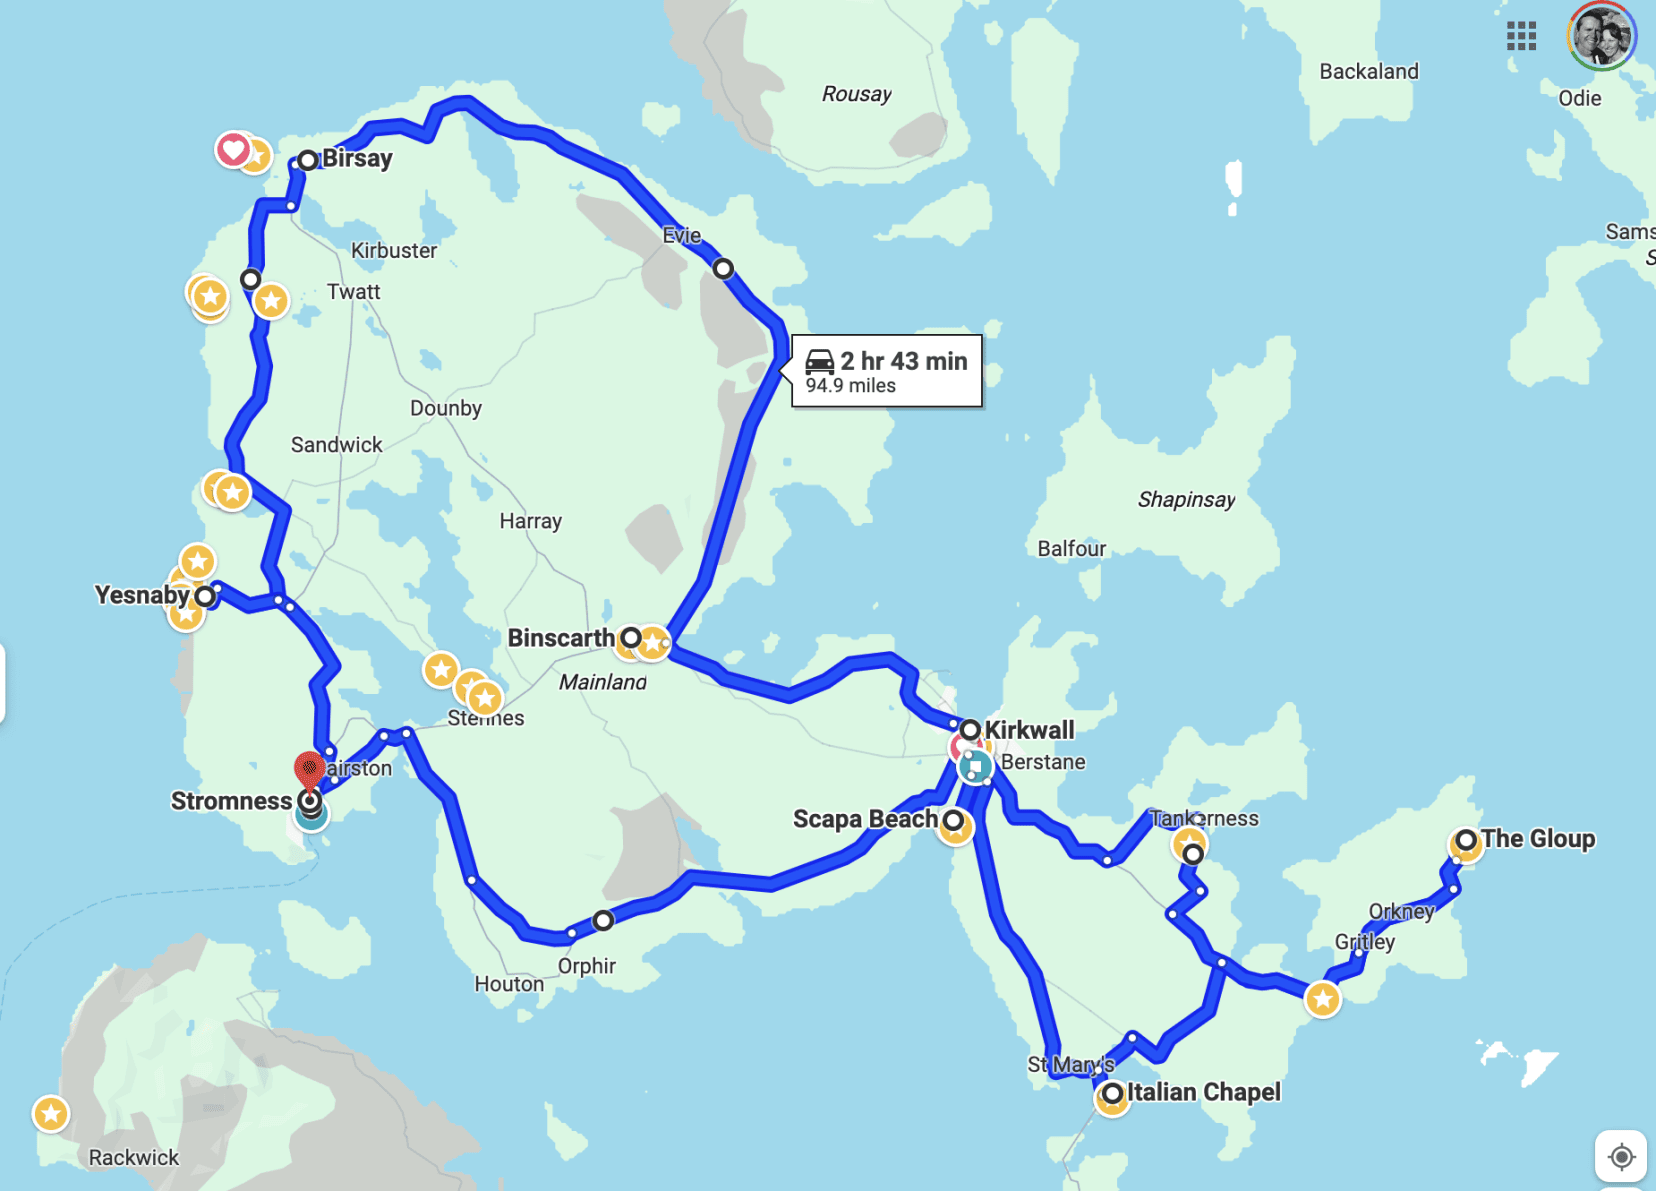 Map of Orkney showing distance around Orkney